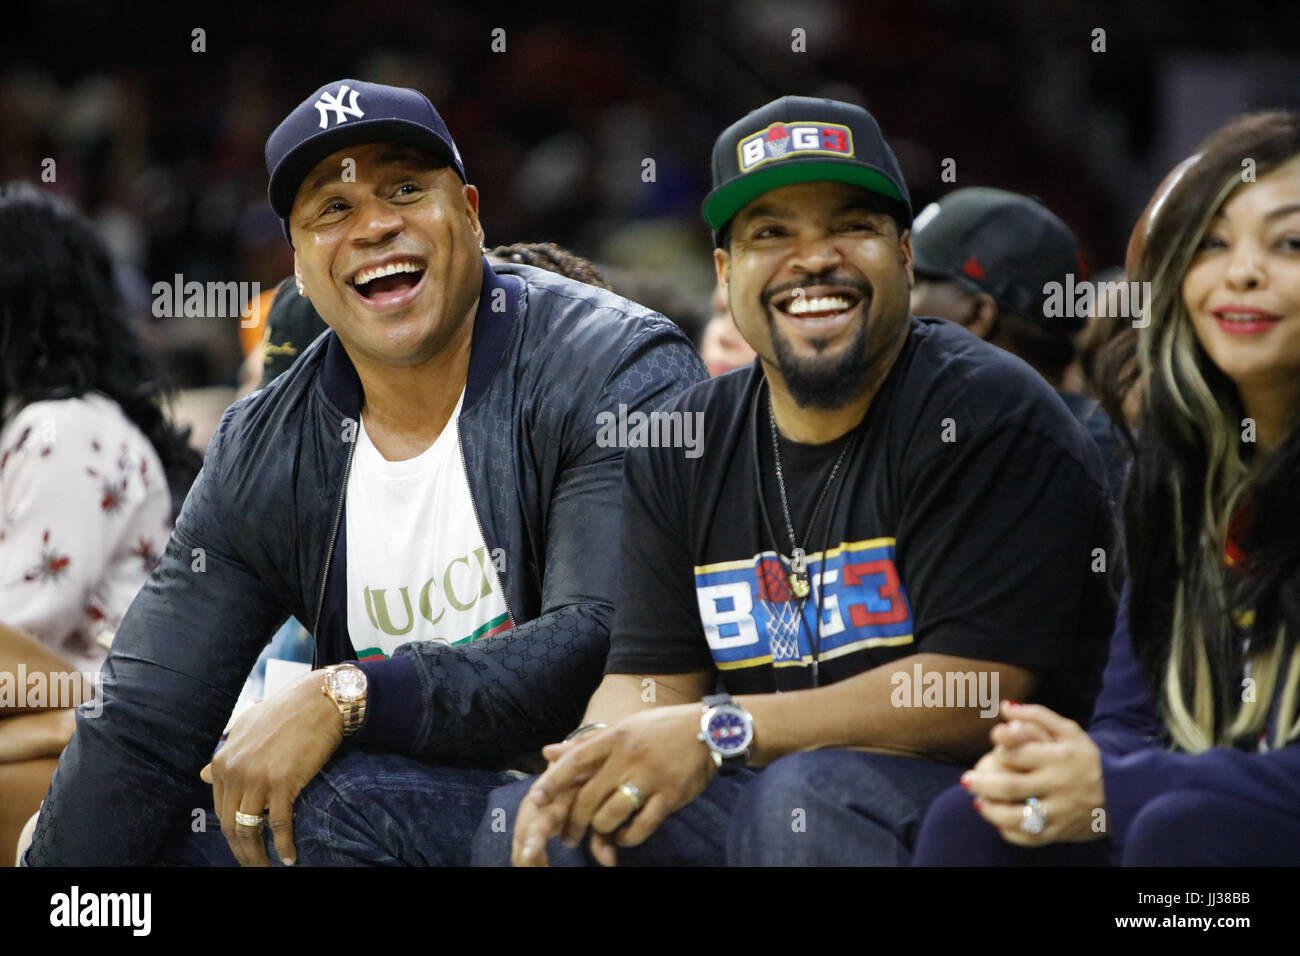 LL Cool J Ice Cube attend Big 3 league Phiily,PA 7/16/17 Stock Photo